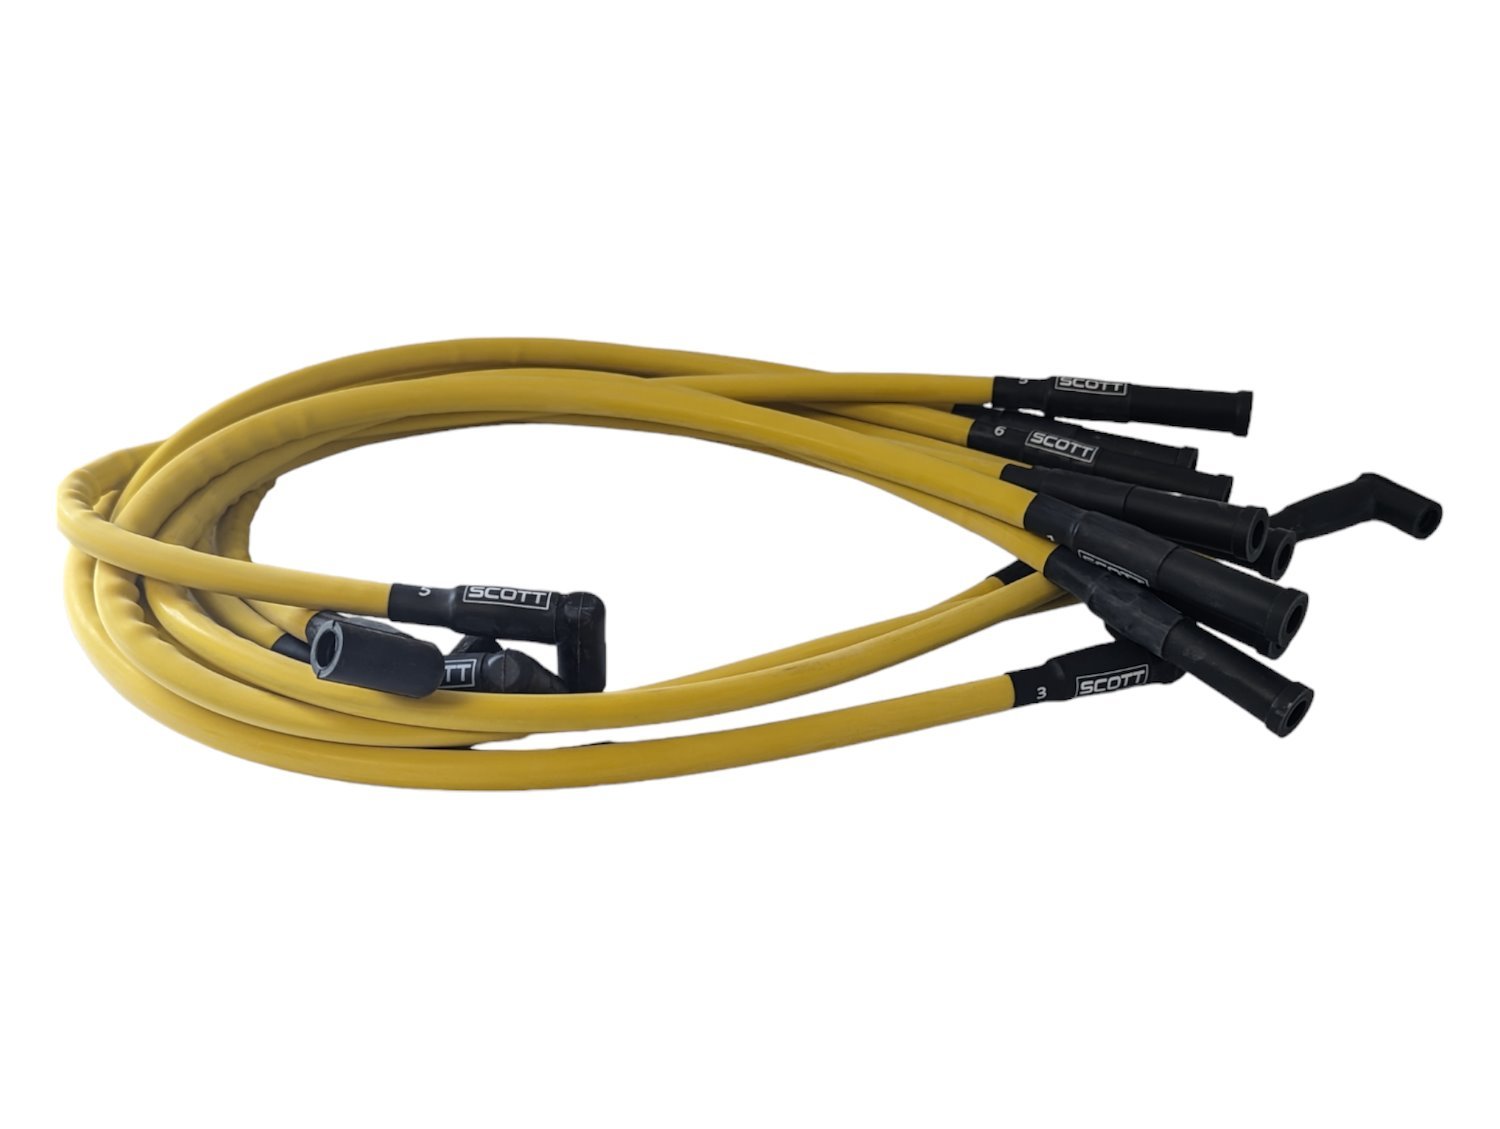 SPW-CH-421-7 High-Performance Silicone-Sleeved Spark Plug Wire Set for Small Block Chevy, Over Valve Cover [Yellow]